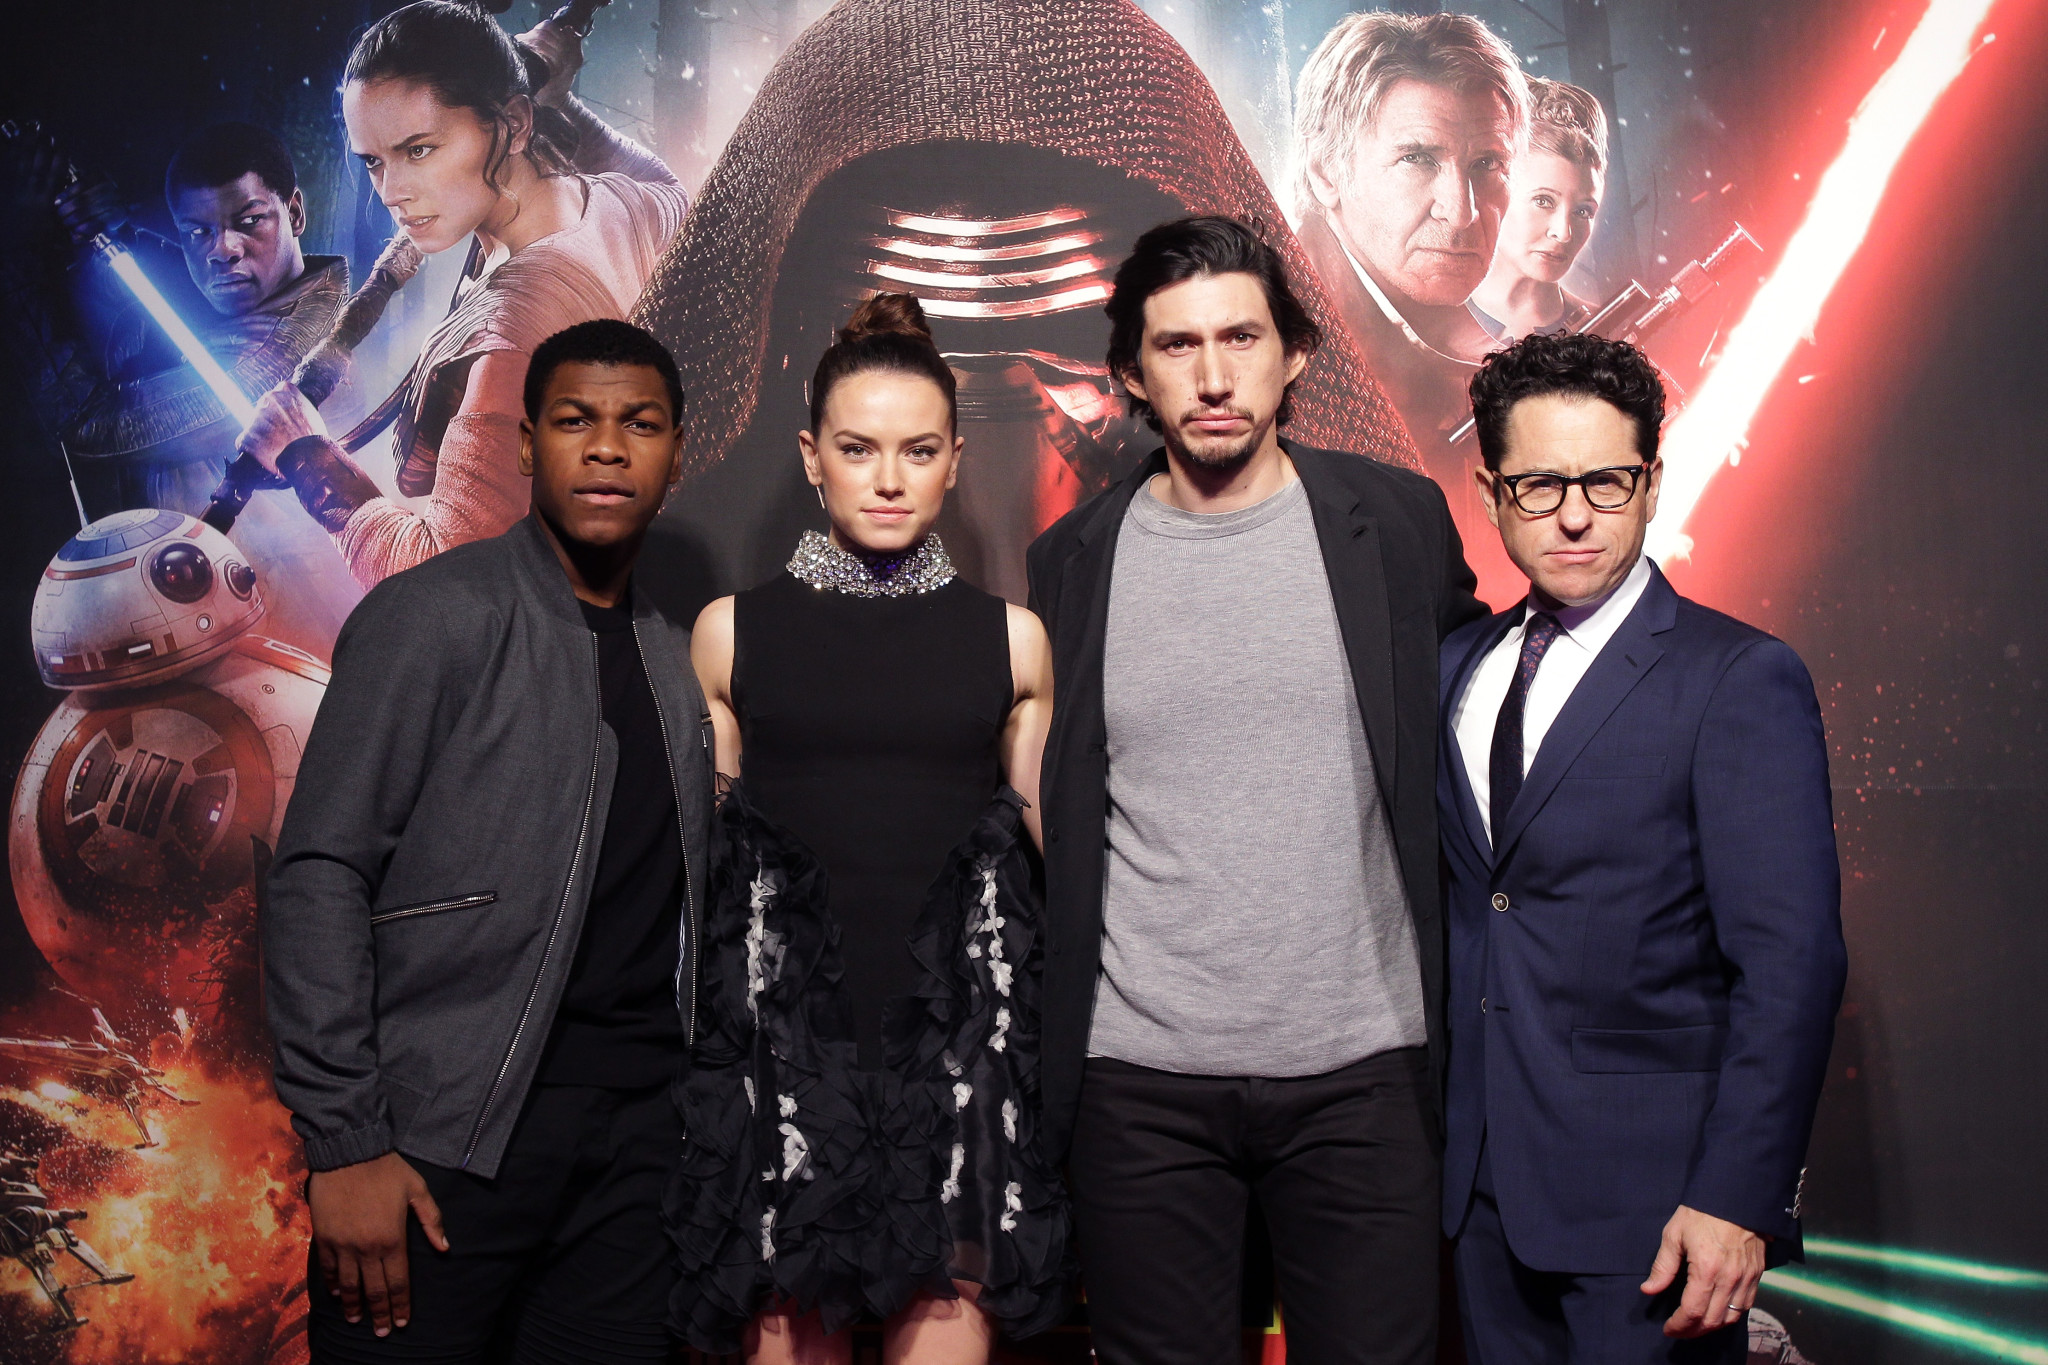 Star Wars: The Force Awakens with a Seoul Fan Event